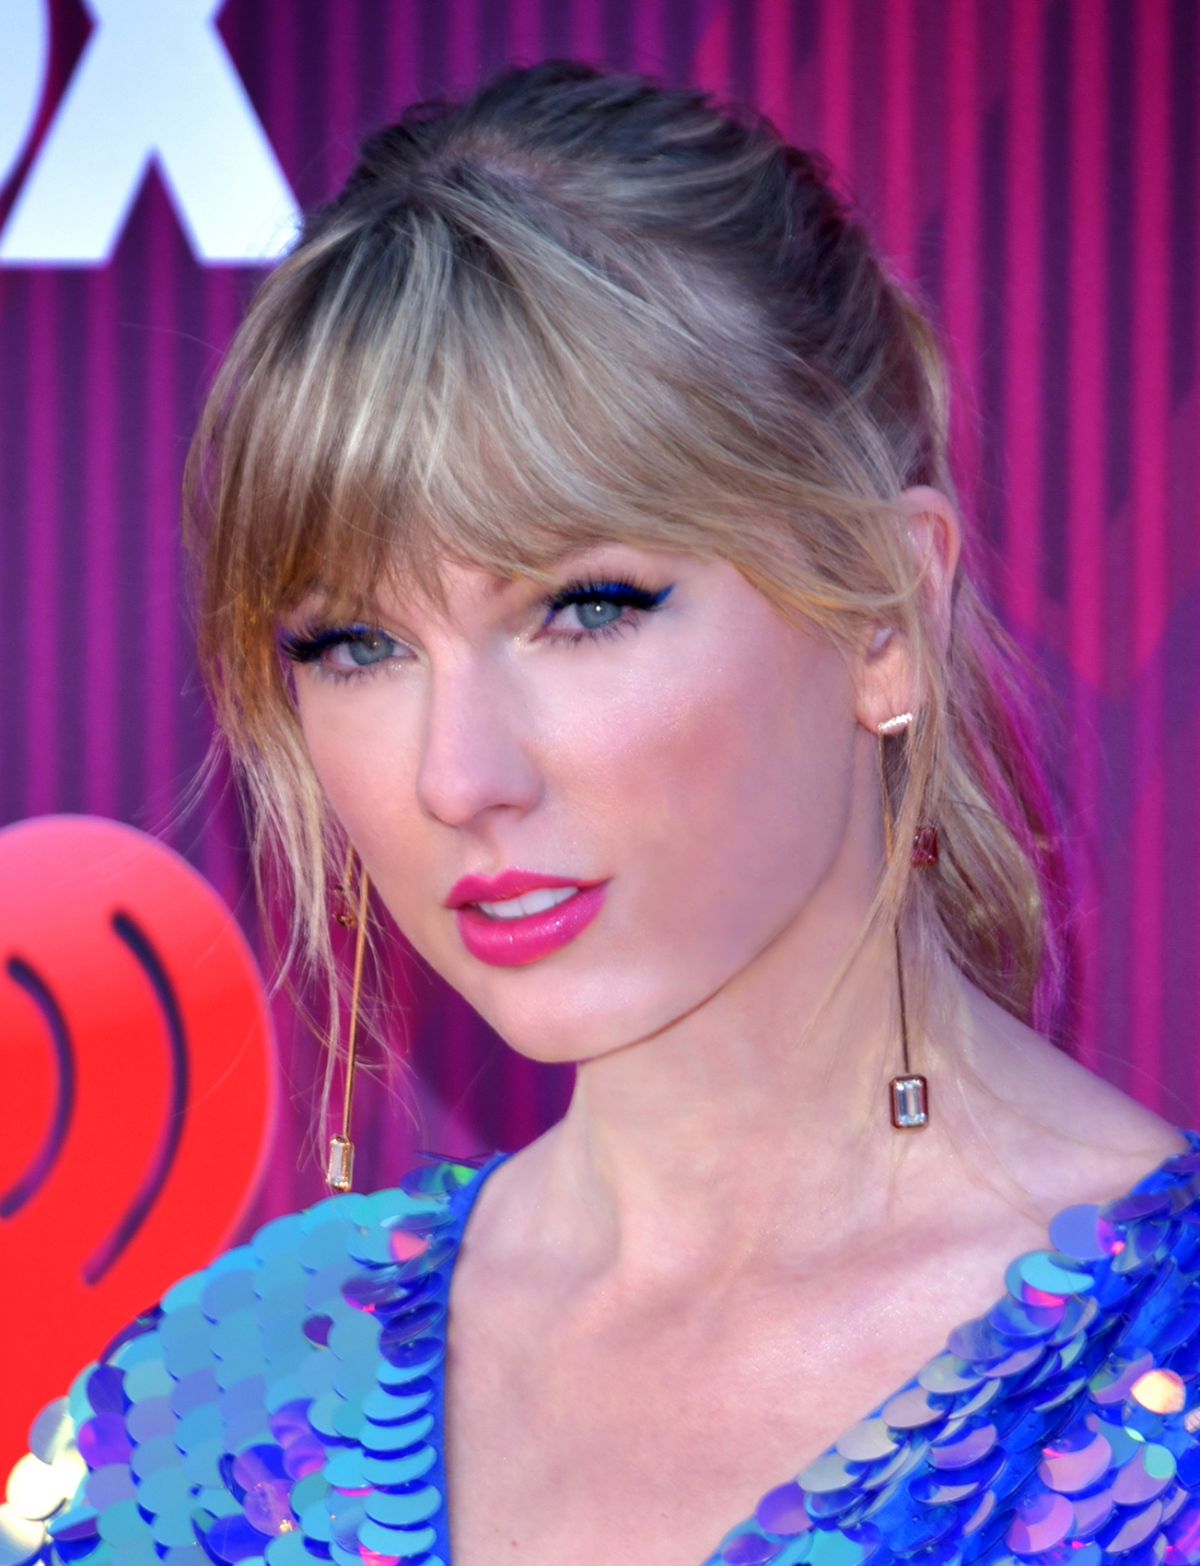 Singer Swift gave her reaction to racism, shared this post